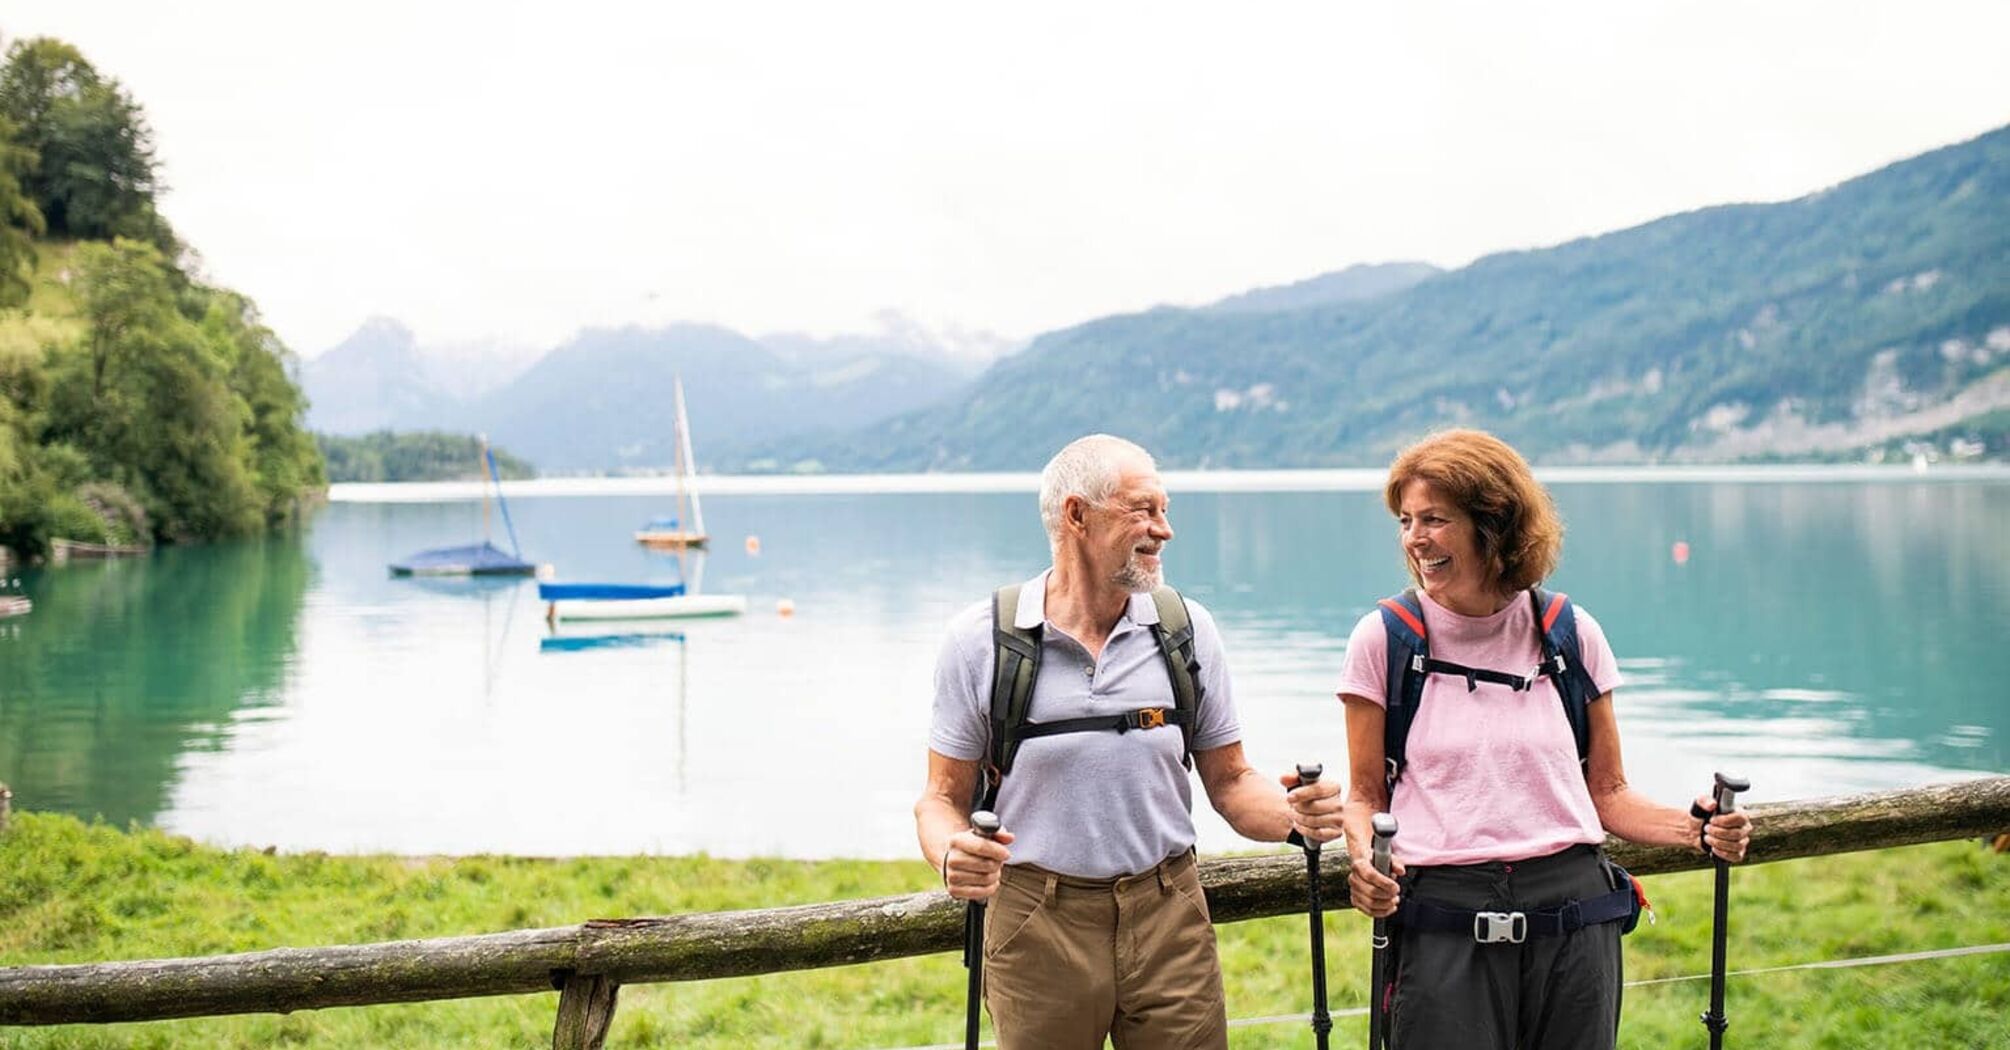 Which countries are the most favorable for retirement